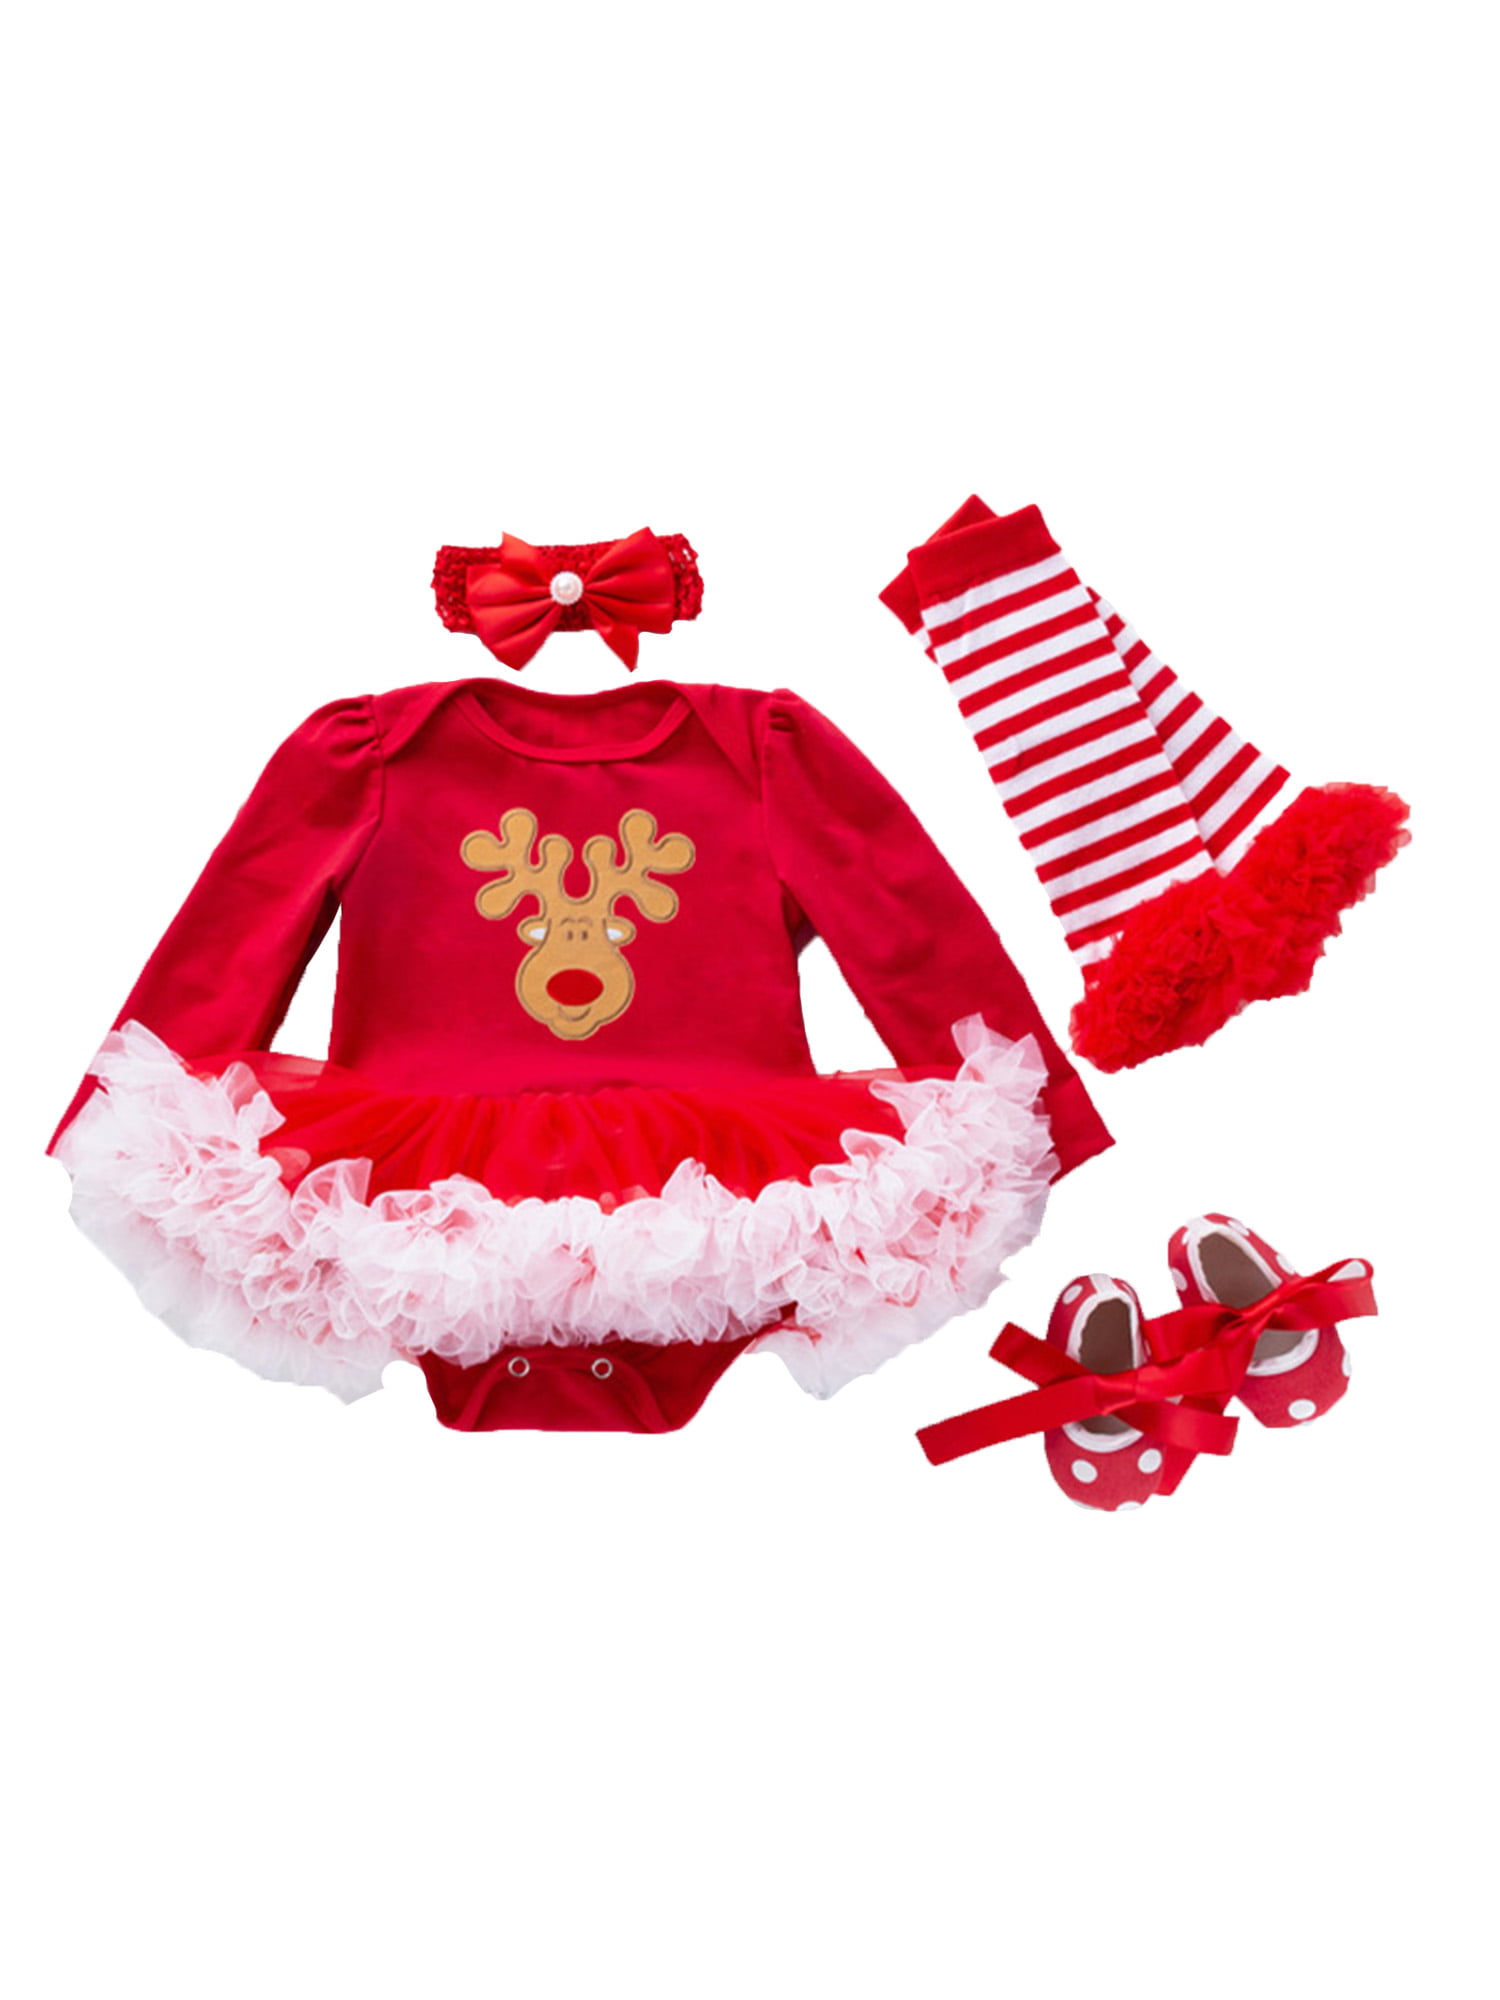 Toddler Infant Baby Girls Christmas XMAS Tutu Tulle Dresses Romper Outfits Cloth 